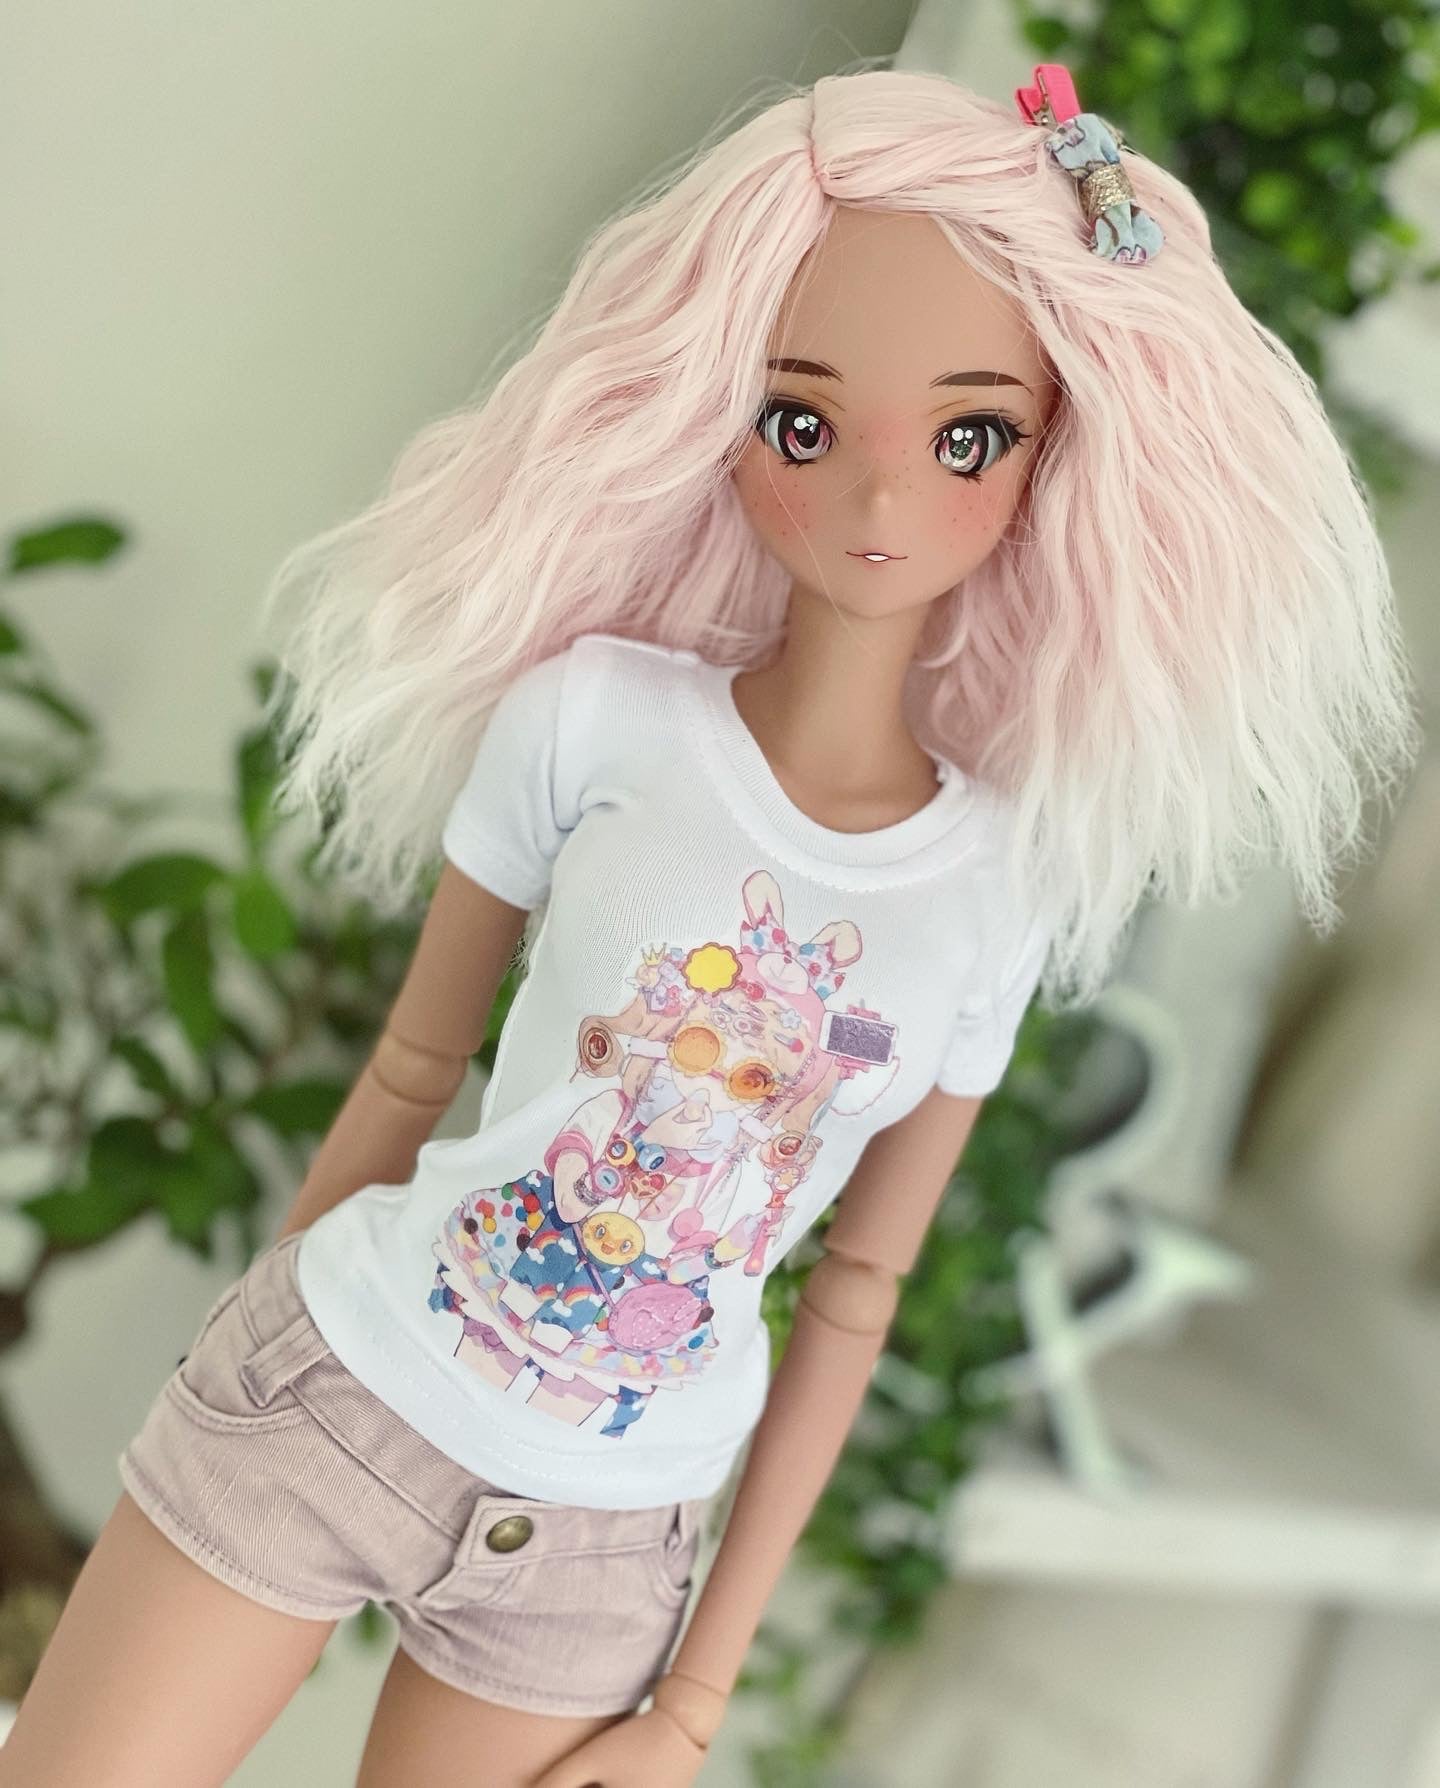 1/3 BJD Smart doll clothes Short Sleeve Fitted  t shirt Fit BJD, Smart Dolls and similar Unisex